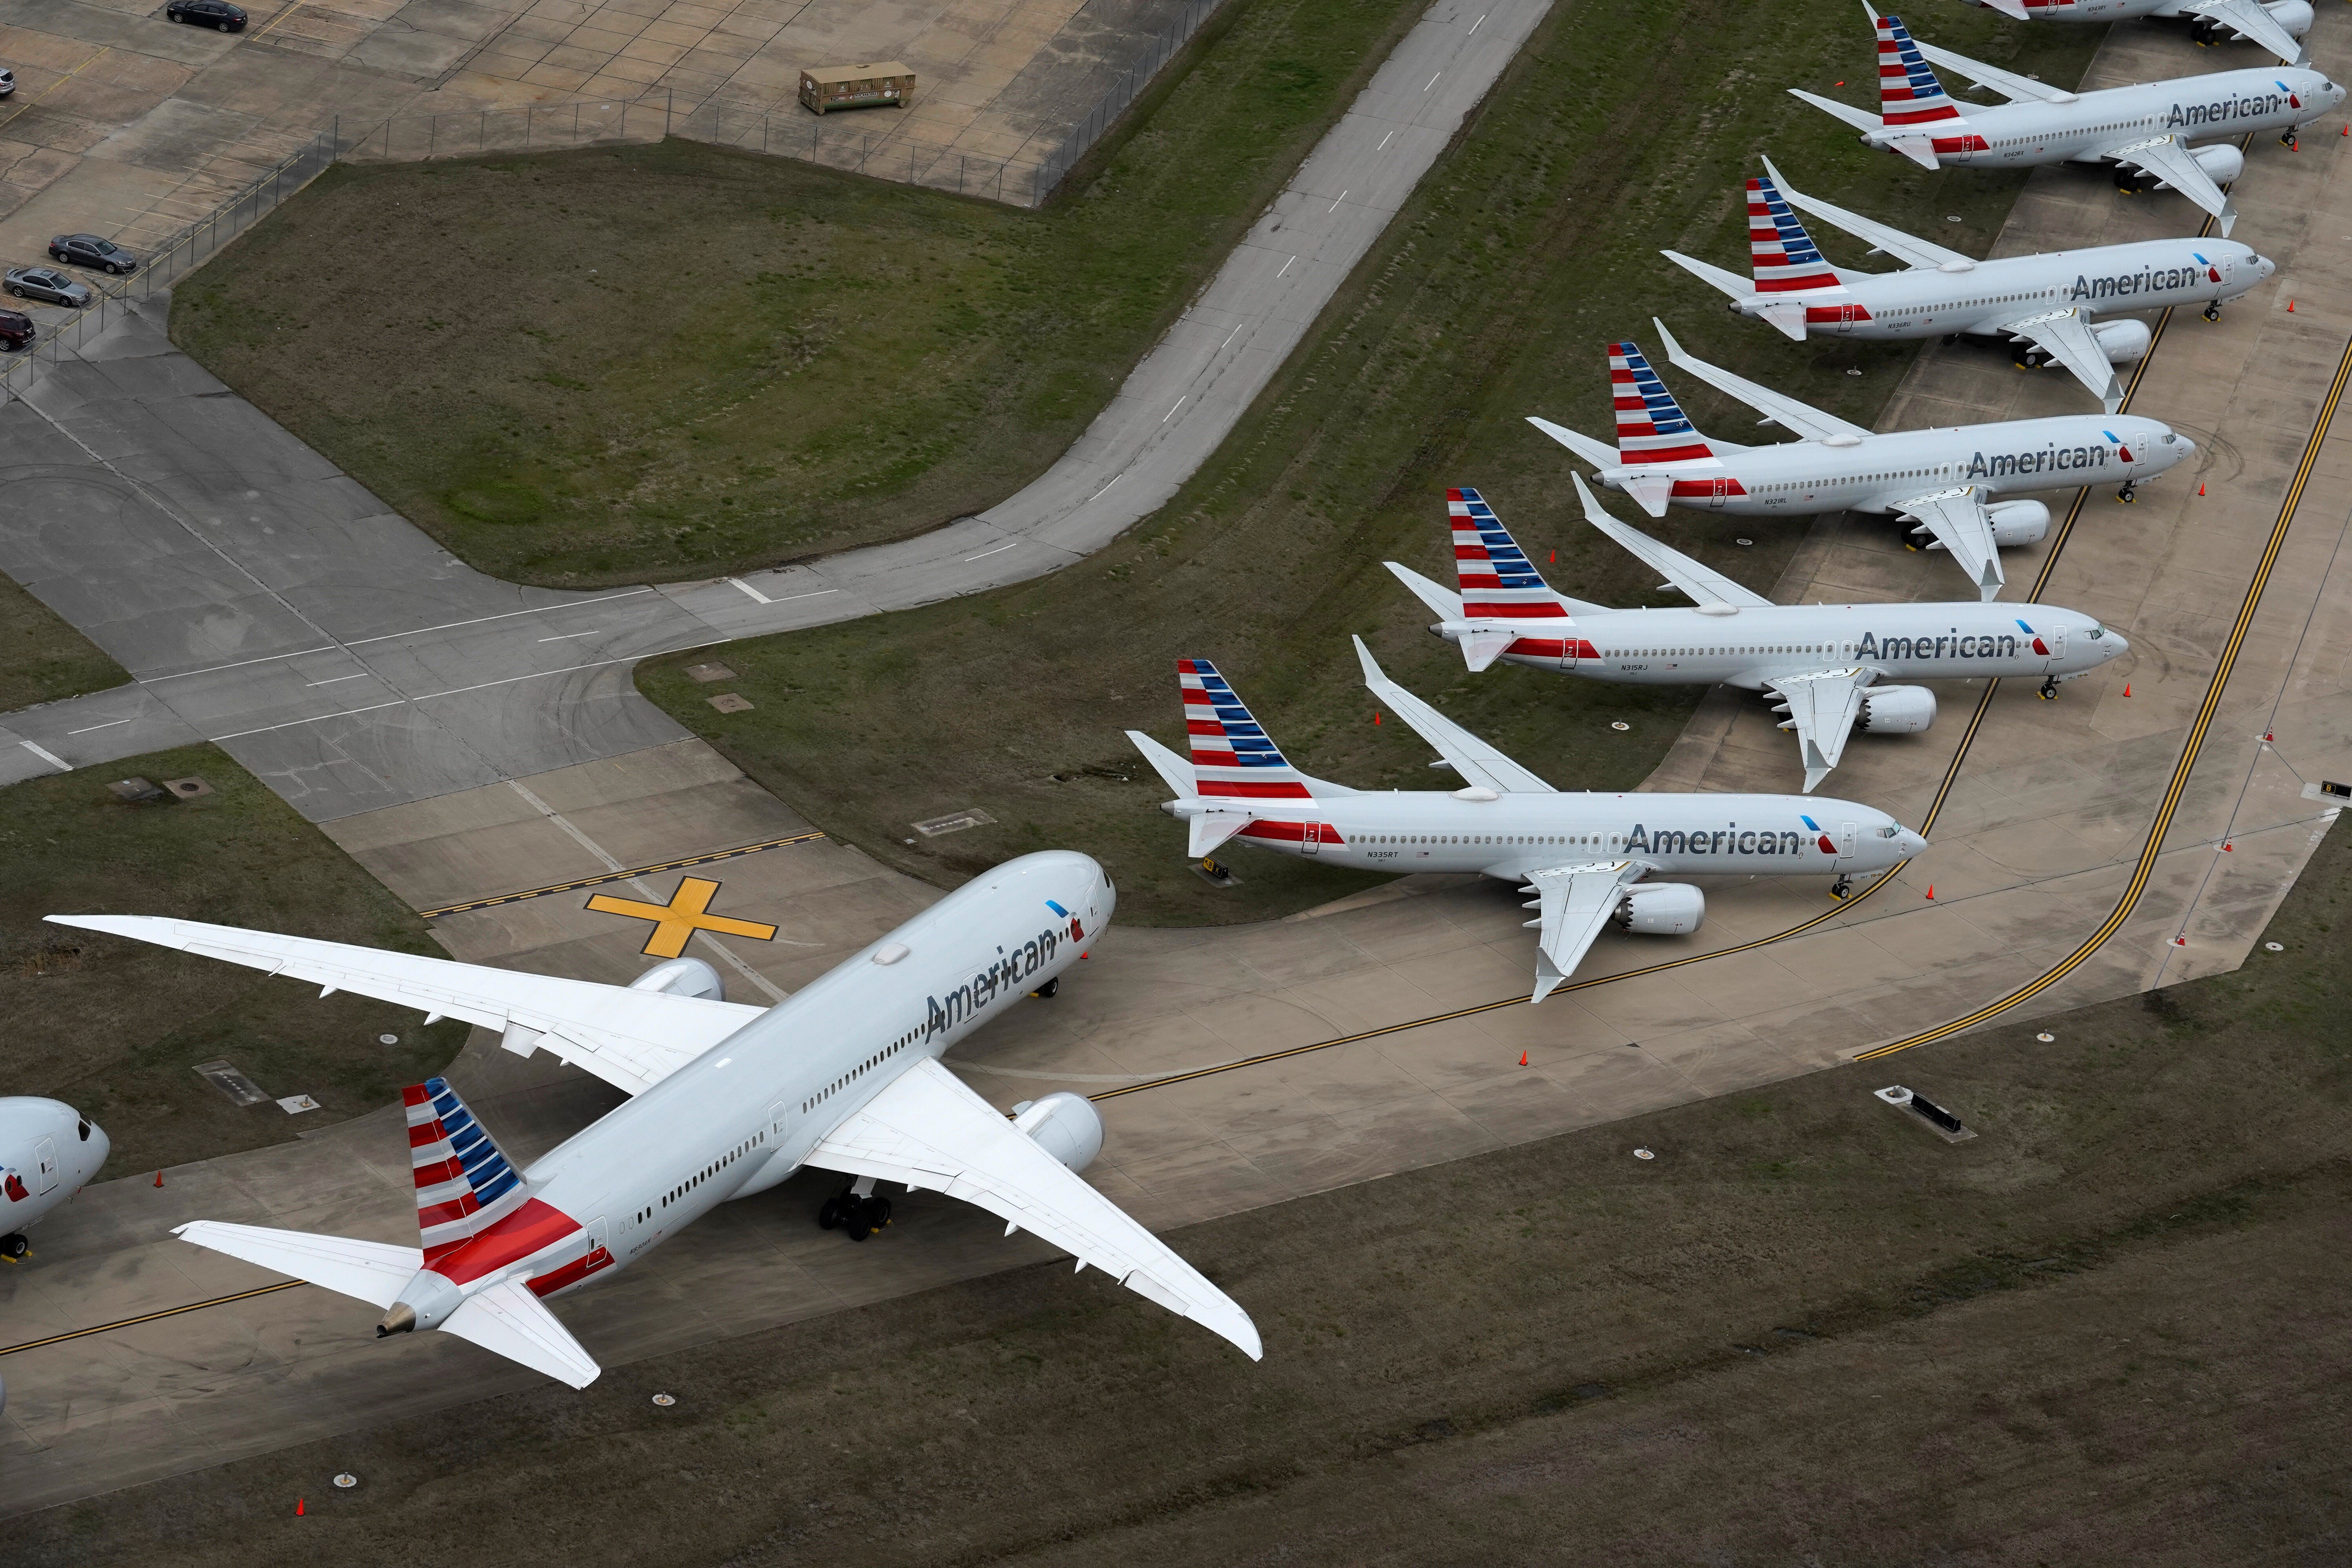 American Airlines planes crowd a runway at Tulsa airport where they have been parked due to the coronavirus pandemic. Photo: Reuters